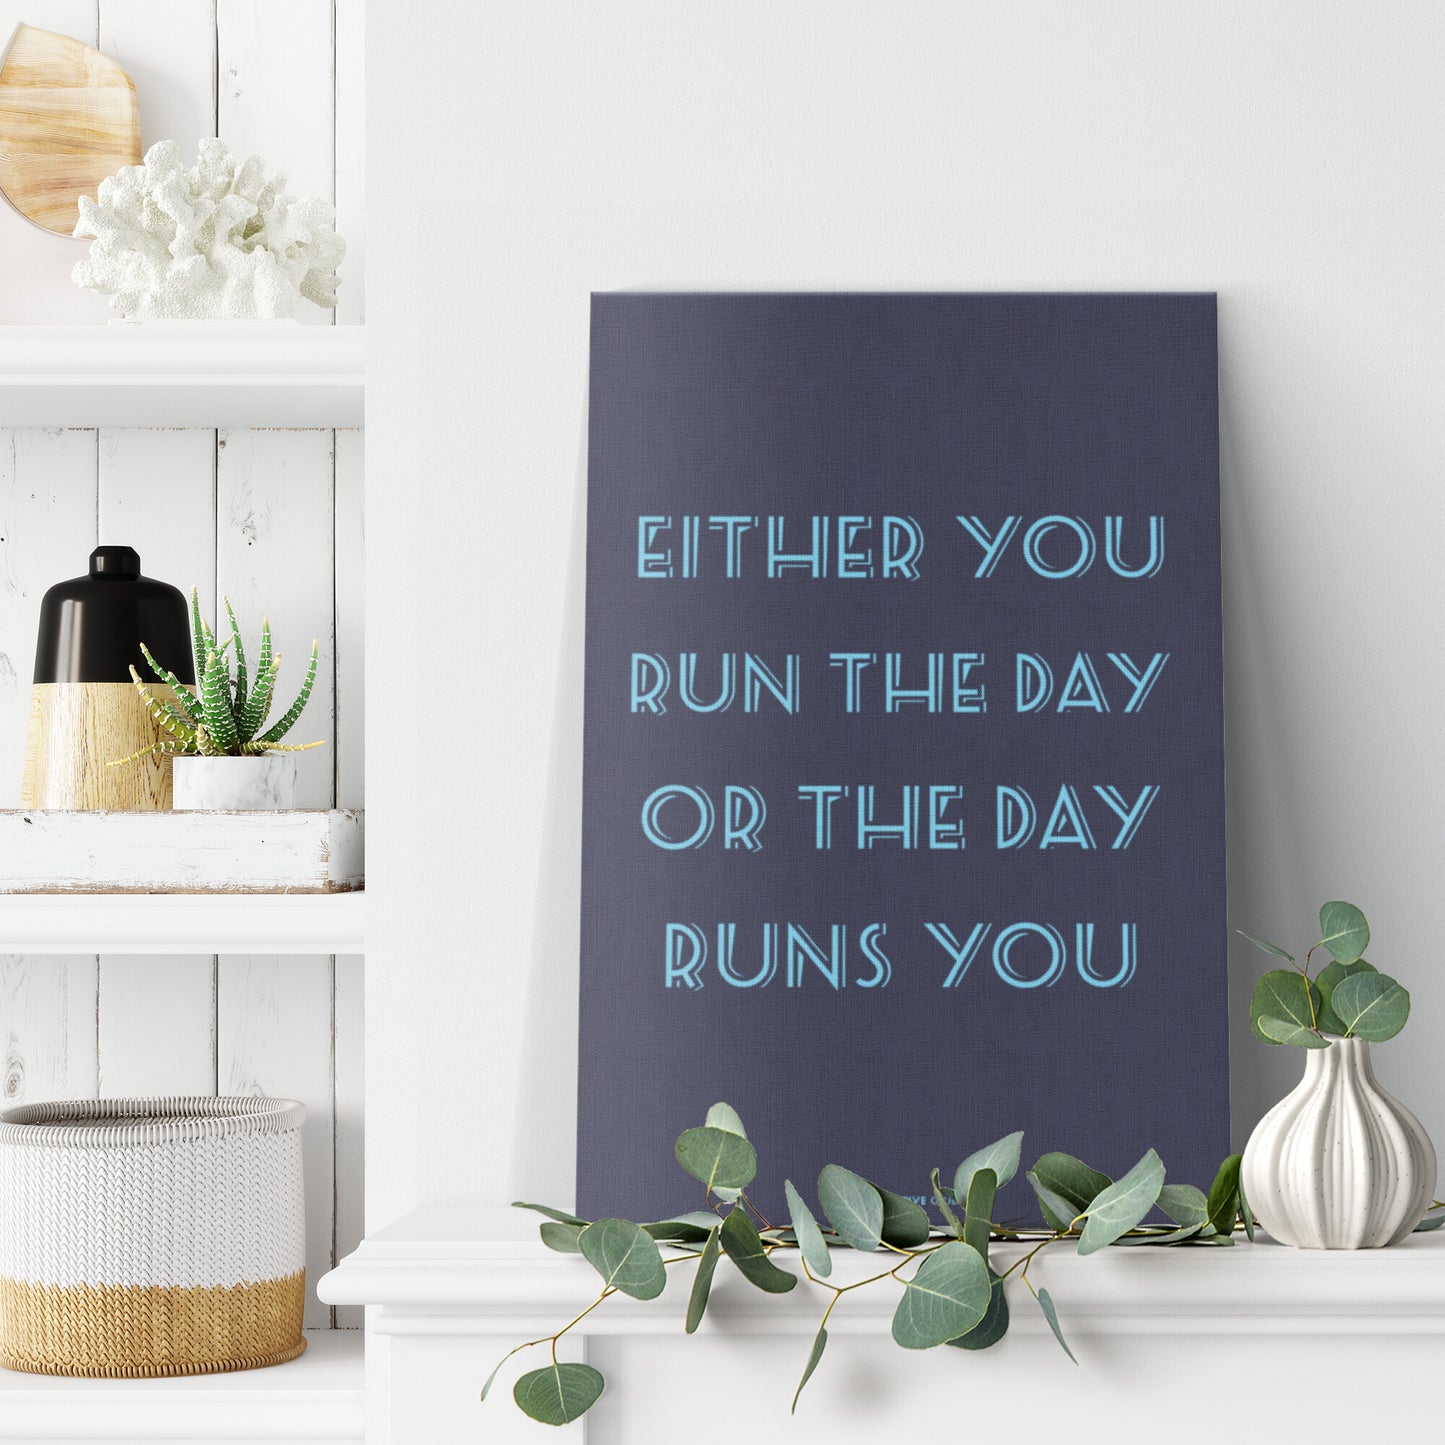 EITHER YOU RUN THE DAY OR THE DAY RUNS YOU